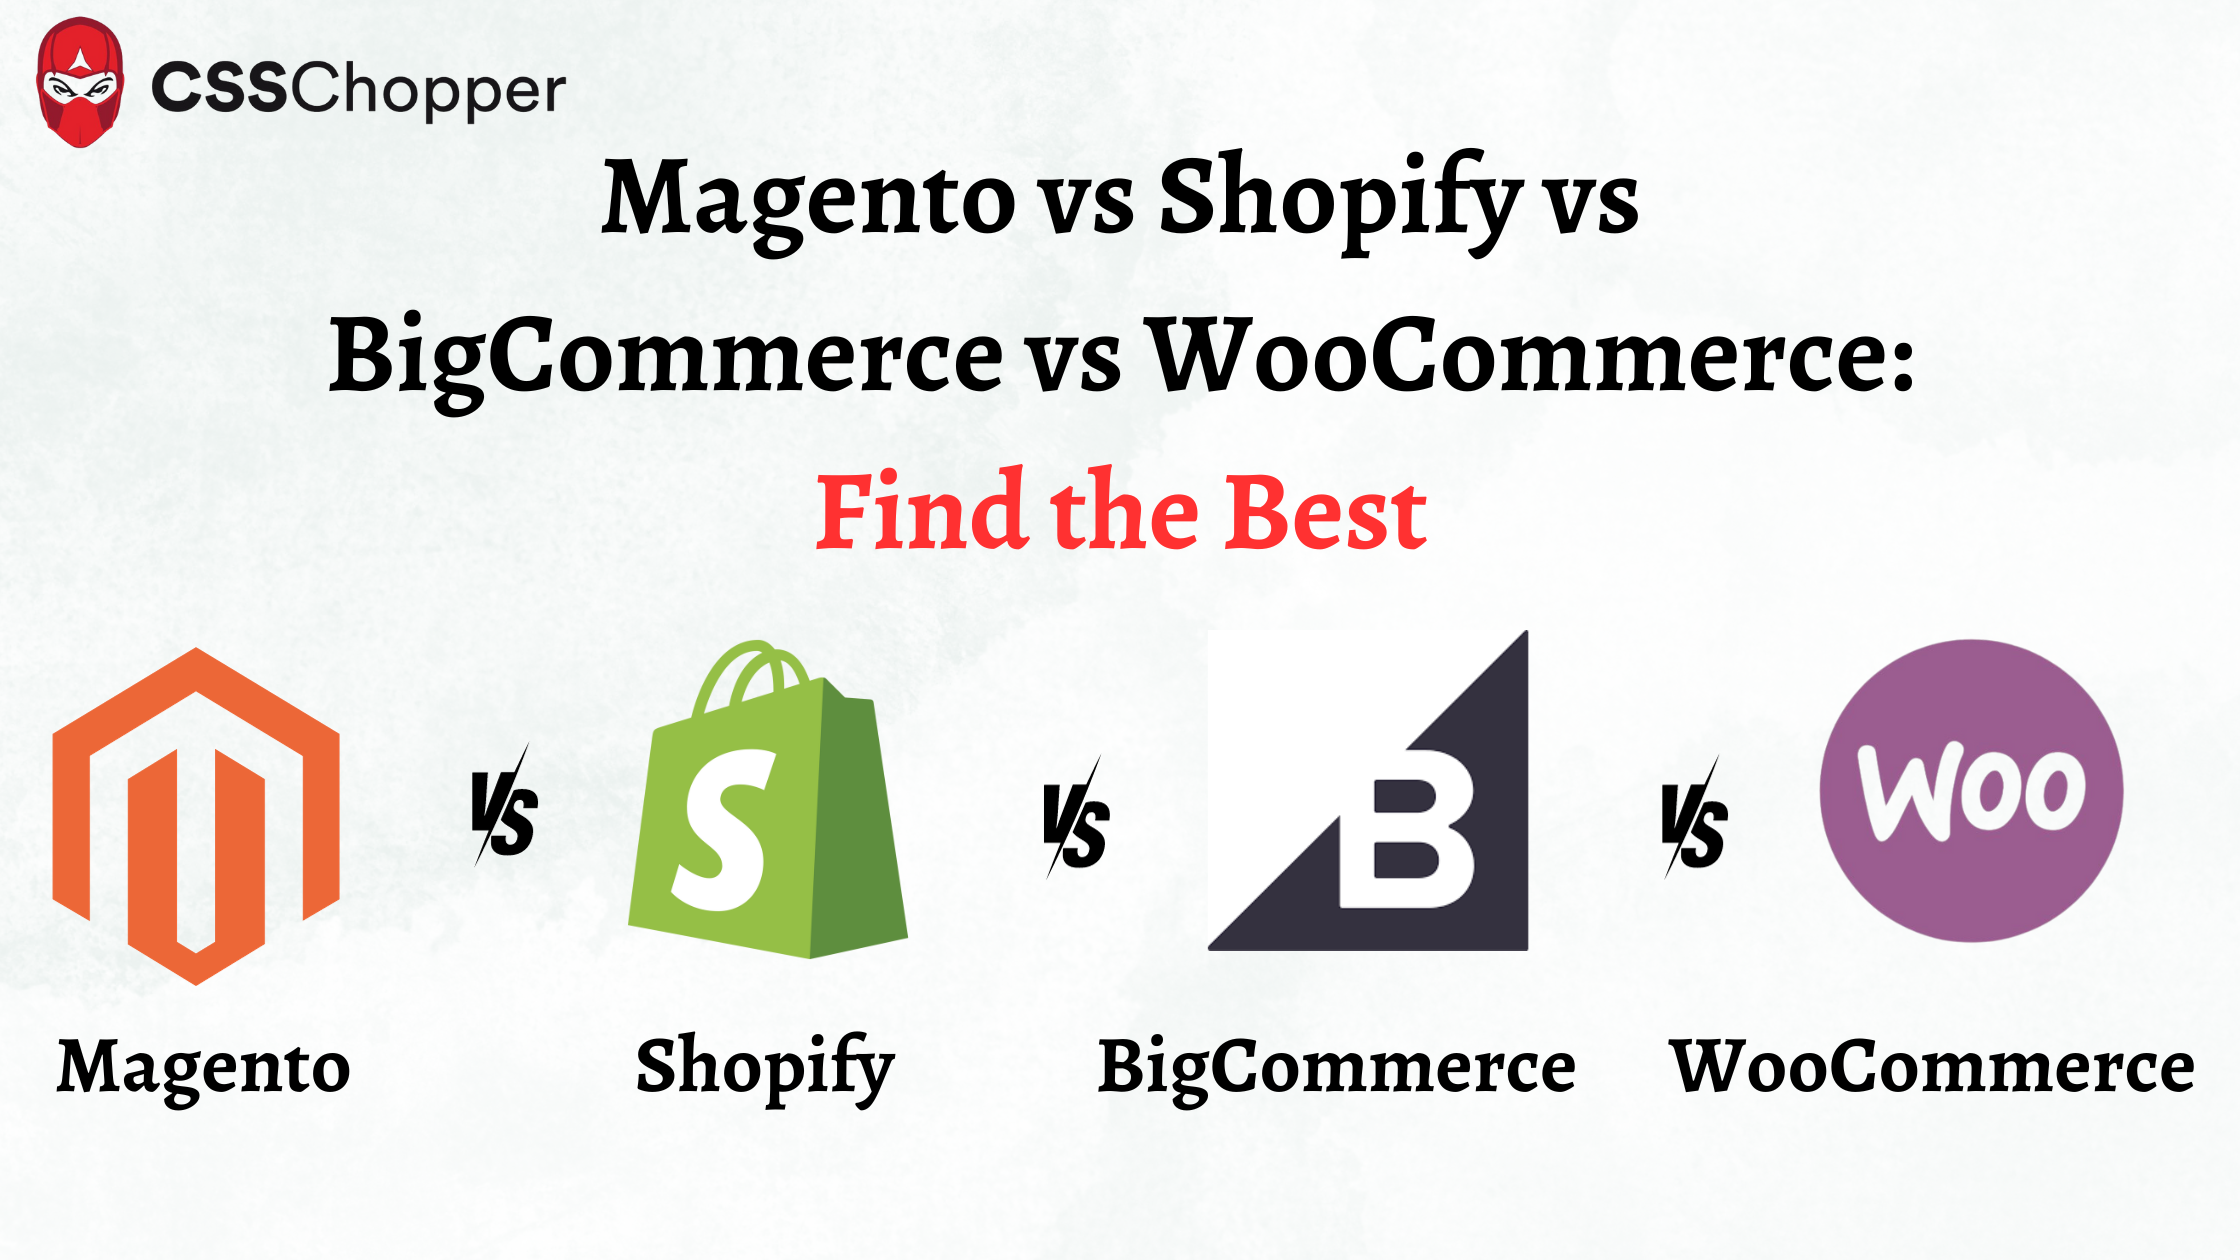 Magento Vs Shopify Vs BigCommerce Vs WooCommerce – Which eCommerce Platform Is Best For You?